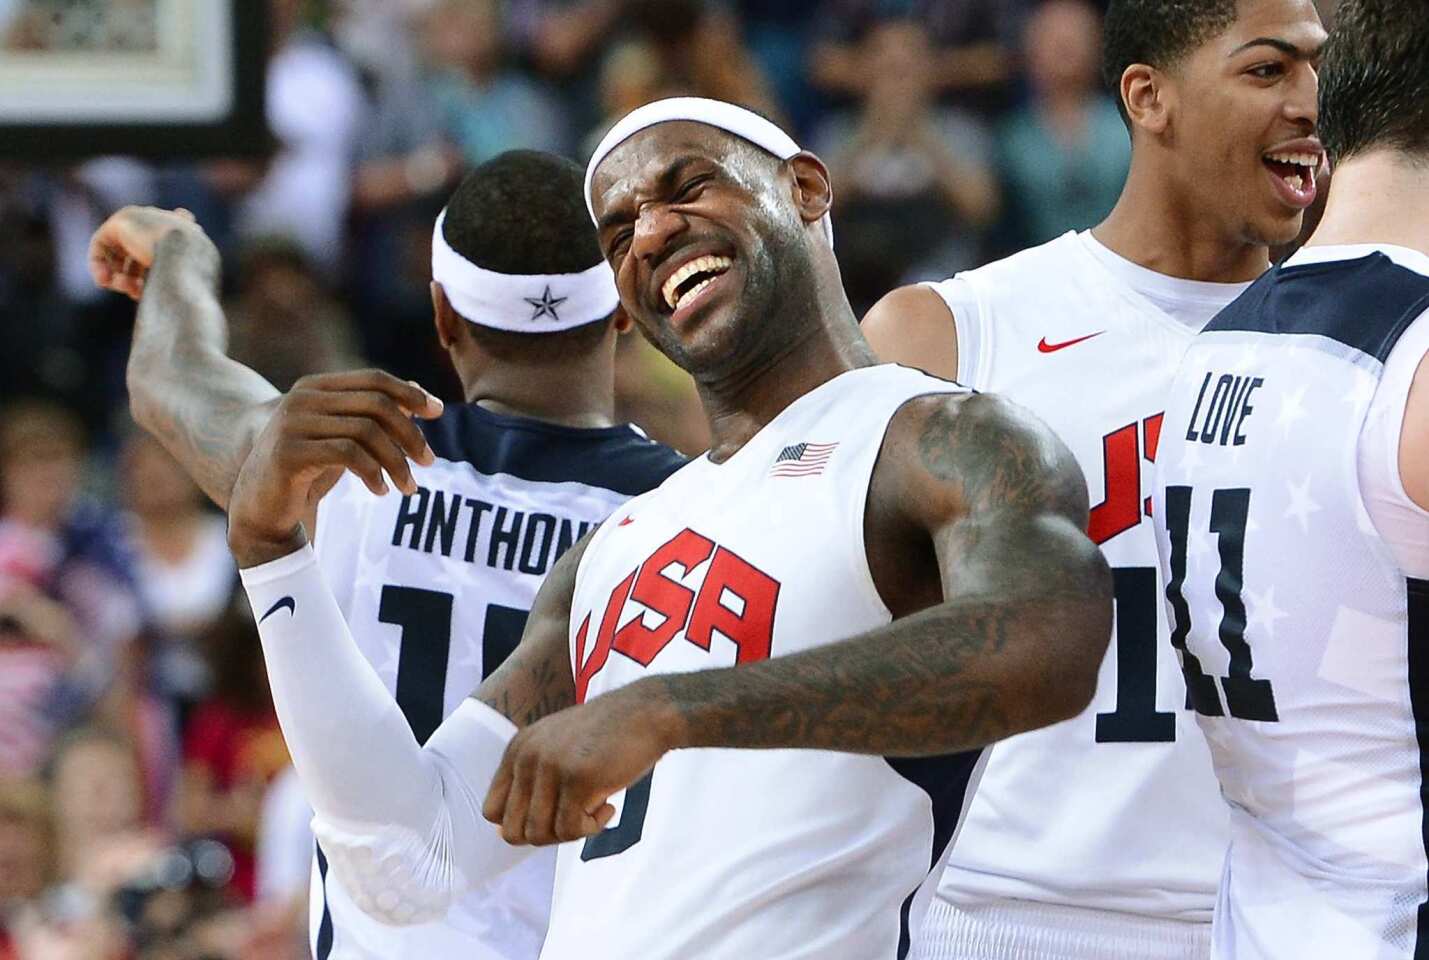 LeBron James celebrates with teammates after defeating Spain in the men's basketball final to win the gold medal.